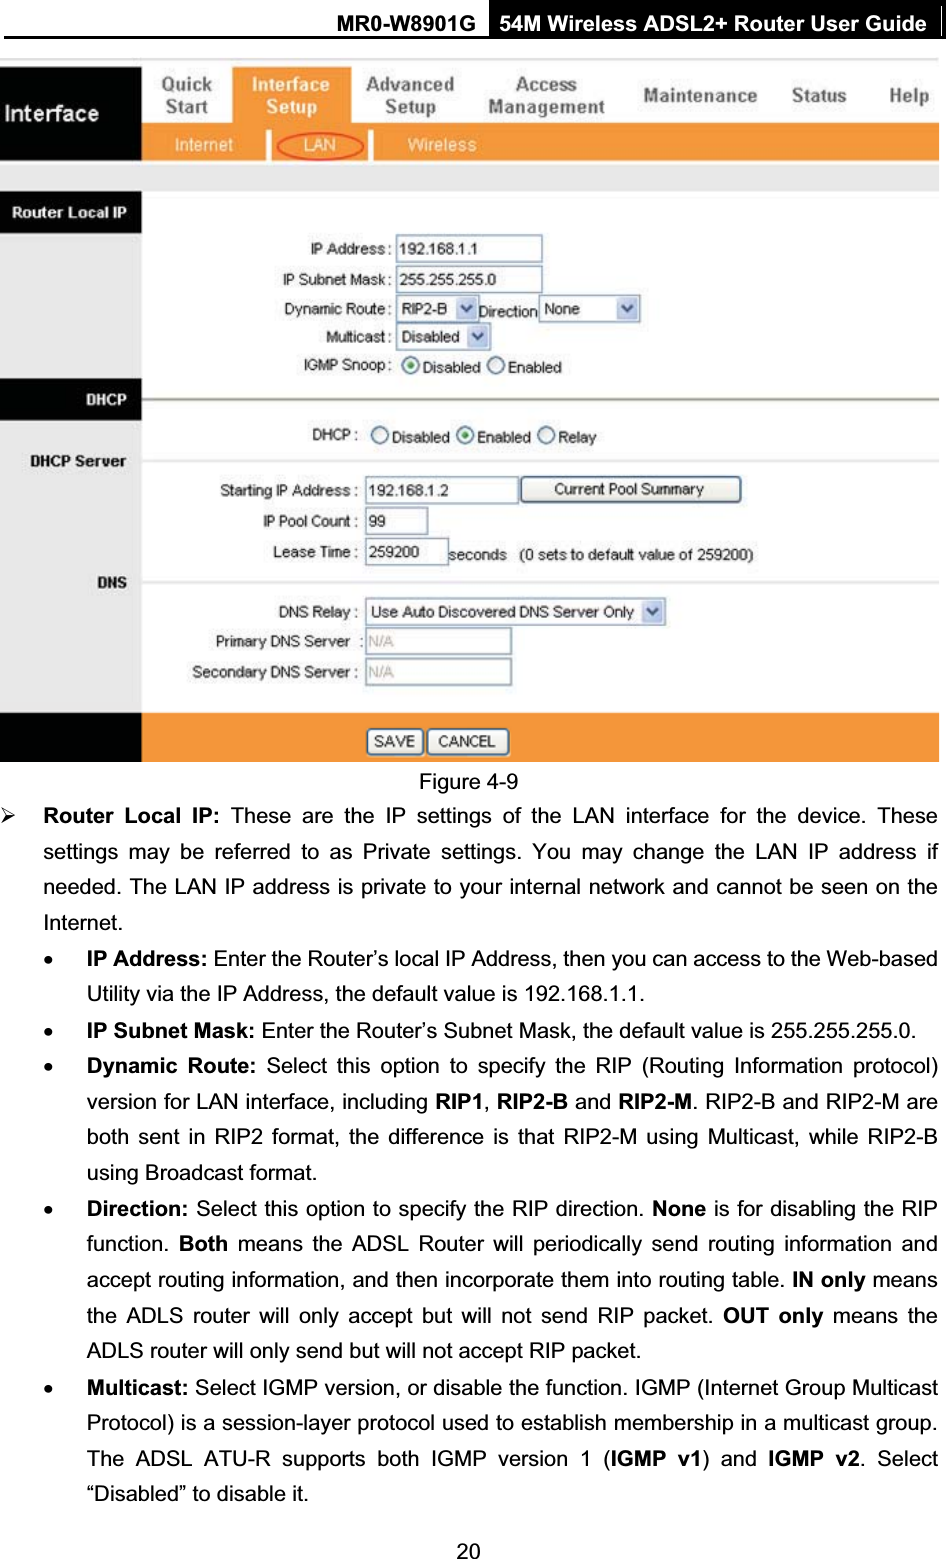 MR0-W8901G 54M Wireless ADSL2+ Router User Guide20Figure 4-9 ¾Router Local IP: These are the IP settings of the LAN interface for the device. These settings may be referred to as Private settings. You may change the LAN IP address if needed. The LAN IP address is private to your internal network and cannot be seen on the Internet.xIP Address: Enter the Router’s local IP Address, then you can access to the Web-based Utility via the IP Address, the default value is 192.168.1.1.xIP Subnet Mask: Enter the Router’s Subnet Mask, the default value is 255.255.255.0.xDynamic Route: Select this option to specify the RIP (Routing Information protocol) version for LAN interface, including RIP1,RIP2-B and RIP2-M. RIP2-B and RIP2-M are both sent in RIP2 format, the difference is that RIP2-M using Multicast, while RIP2-B using Broadcast format. xDirection: Select this option to specify the RIP direction. None is for disabling the RIP function. Both means the ADSL Router will periodically send routing information and accept routing information, and then incorporate them into routing table. IN only means the ADLS router will only accept but will not send RIP packet. OUT only means the ADLS router will only send but will not accept RIP packet. xMulticast: Select IGMP version, or disable the function. IGMP (Internet Group Multicast Protocol) is a session-layer protocol used to establish membership in a multicast group. The ADSL ATU-R supports both IGMP version 1 (IGMP v1) and IGMP v2. Select “Disabled” to disable it. 